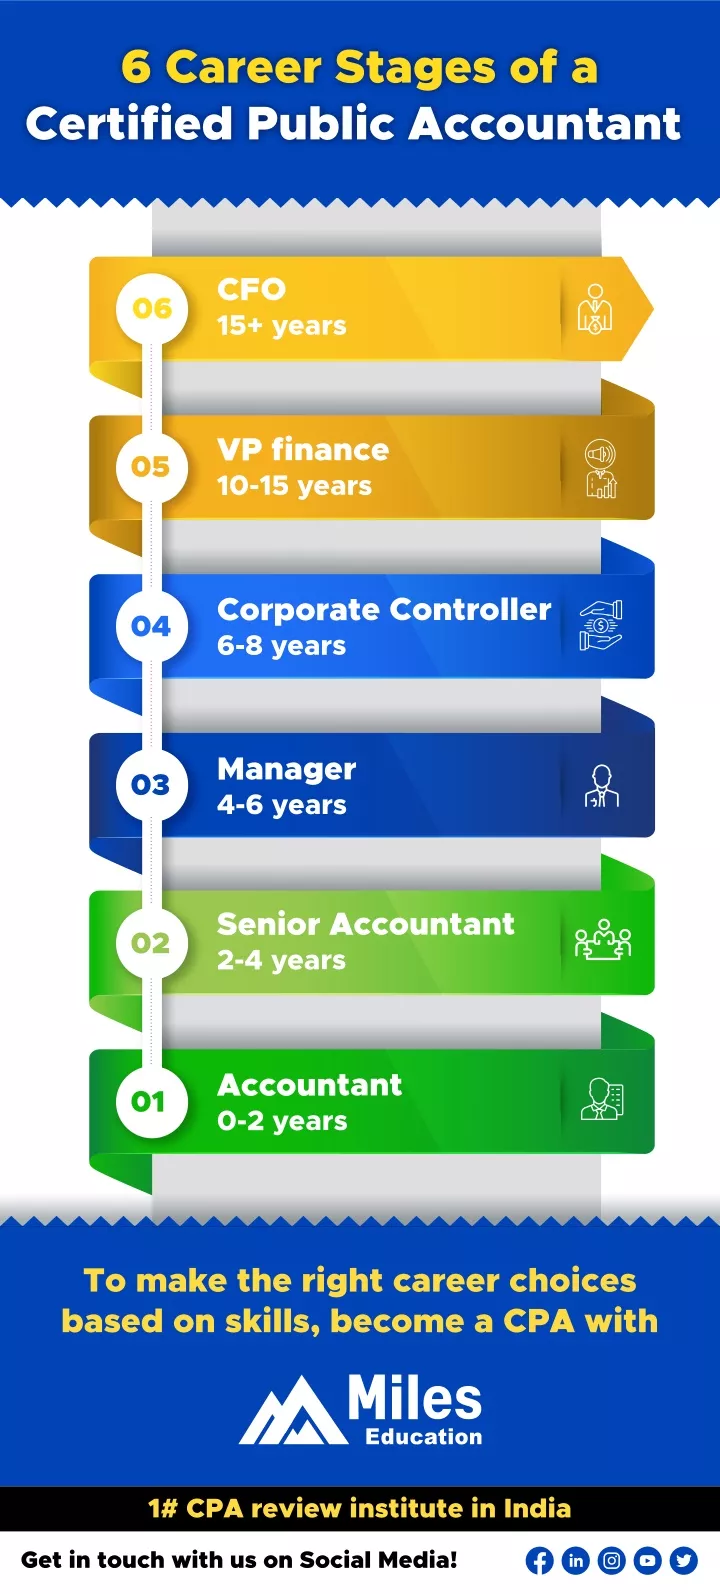 6 career stages of a certified public accountant